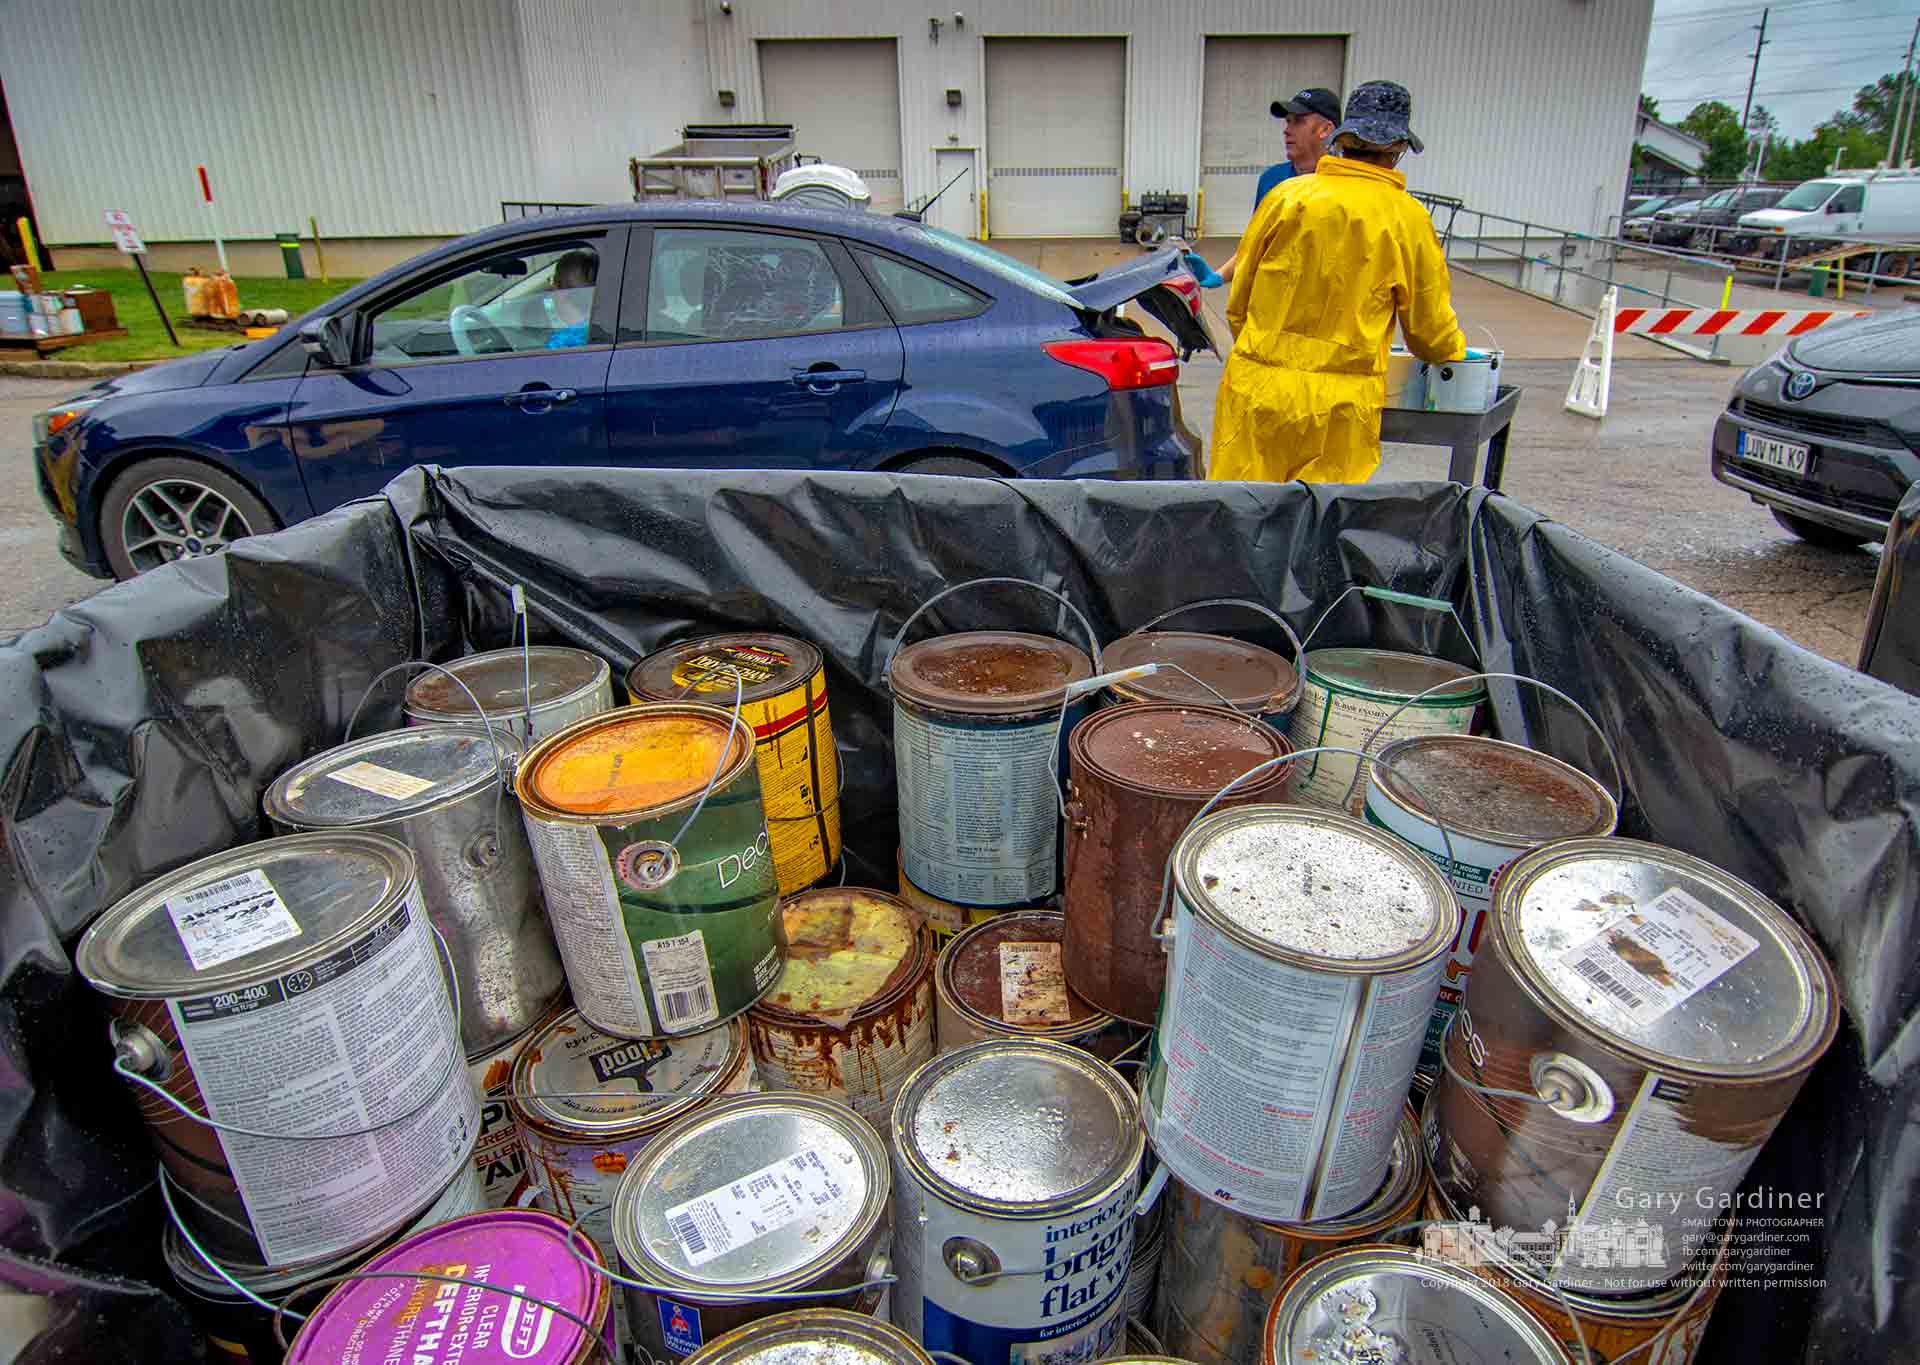 Solid Waste Authority of Central Ohio workers unload a car carrying household hazardous waste including old paint cans at the city's twice-yearly disposal event at the city garage. My Final Photo for Sept. 8, 2018.